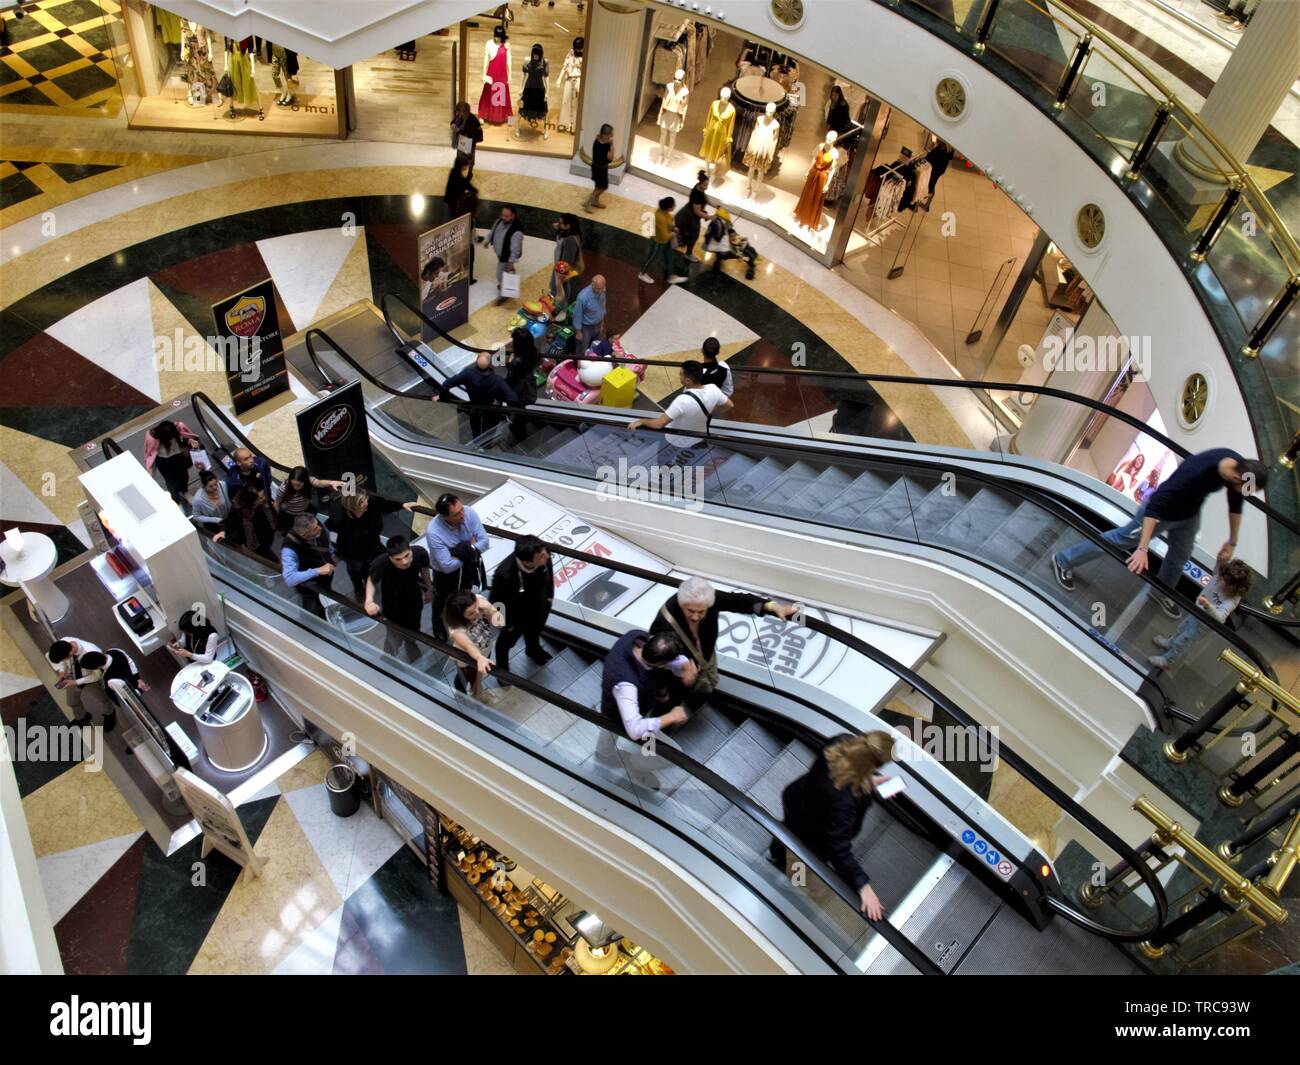 2 Escalators High Resolution Stock Photography and Images - Alamy